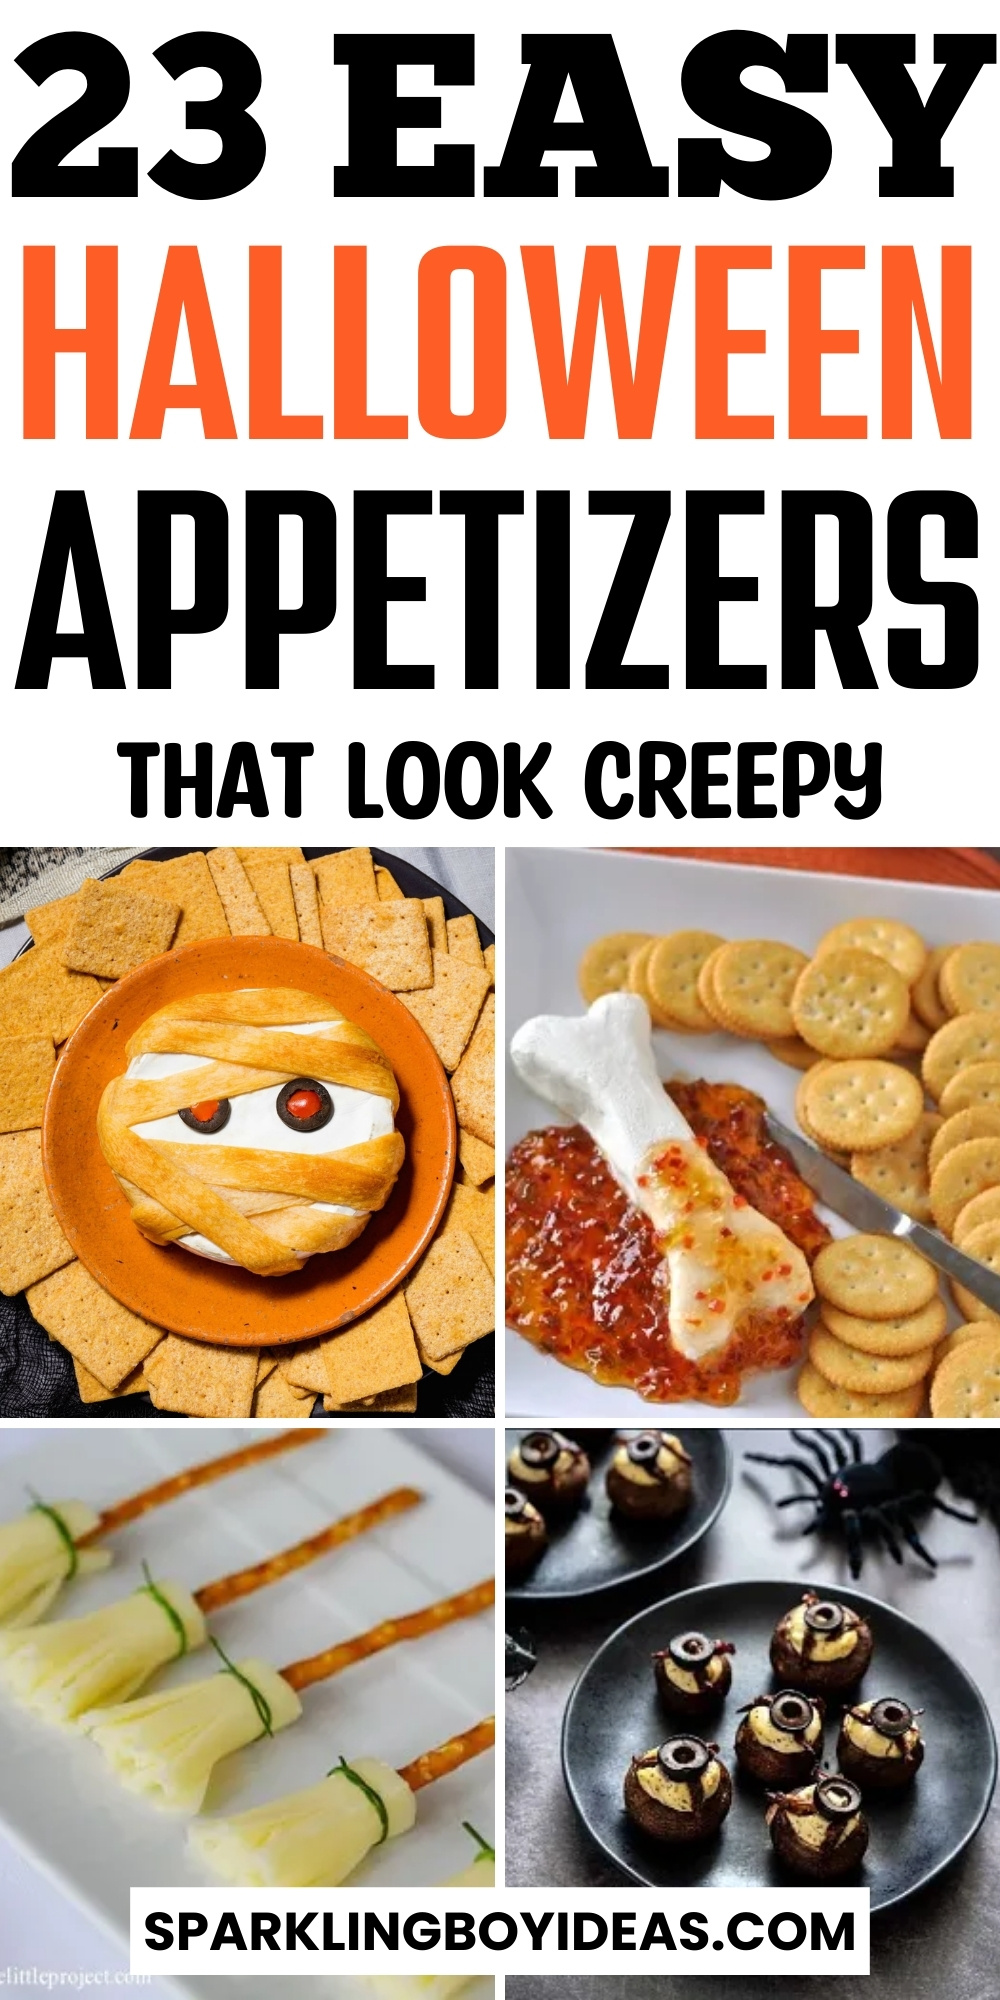 26 Spine Chilling Halloween Appetizers - Sparkling Boy Ideas